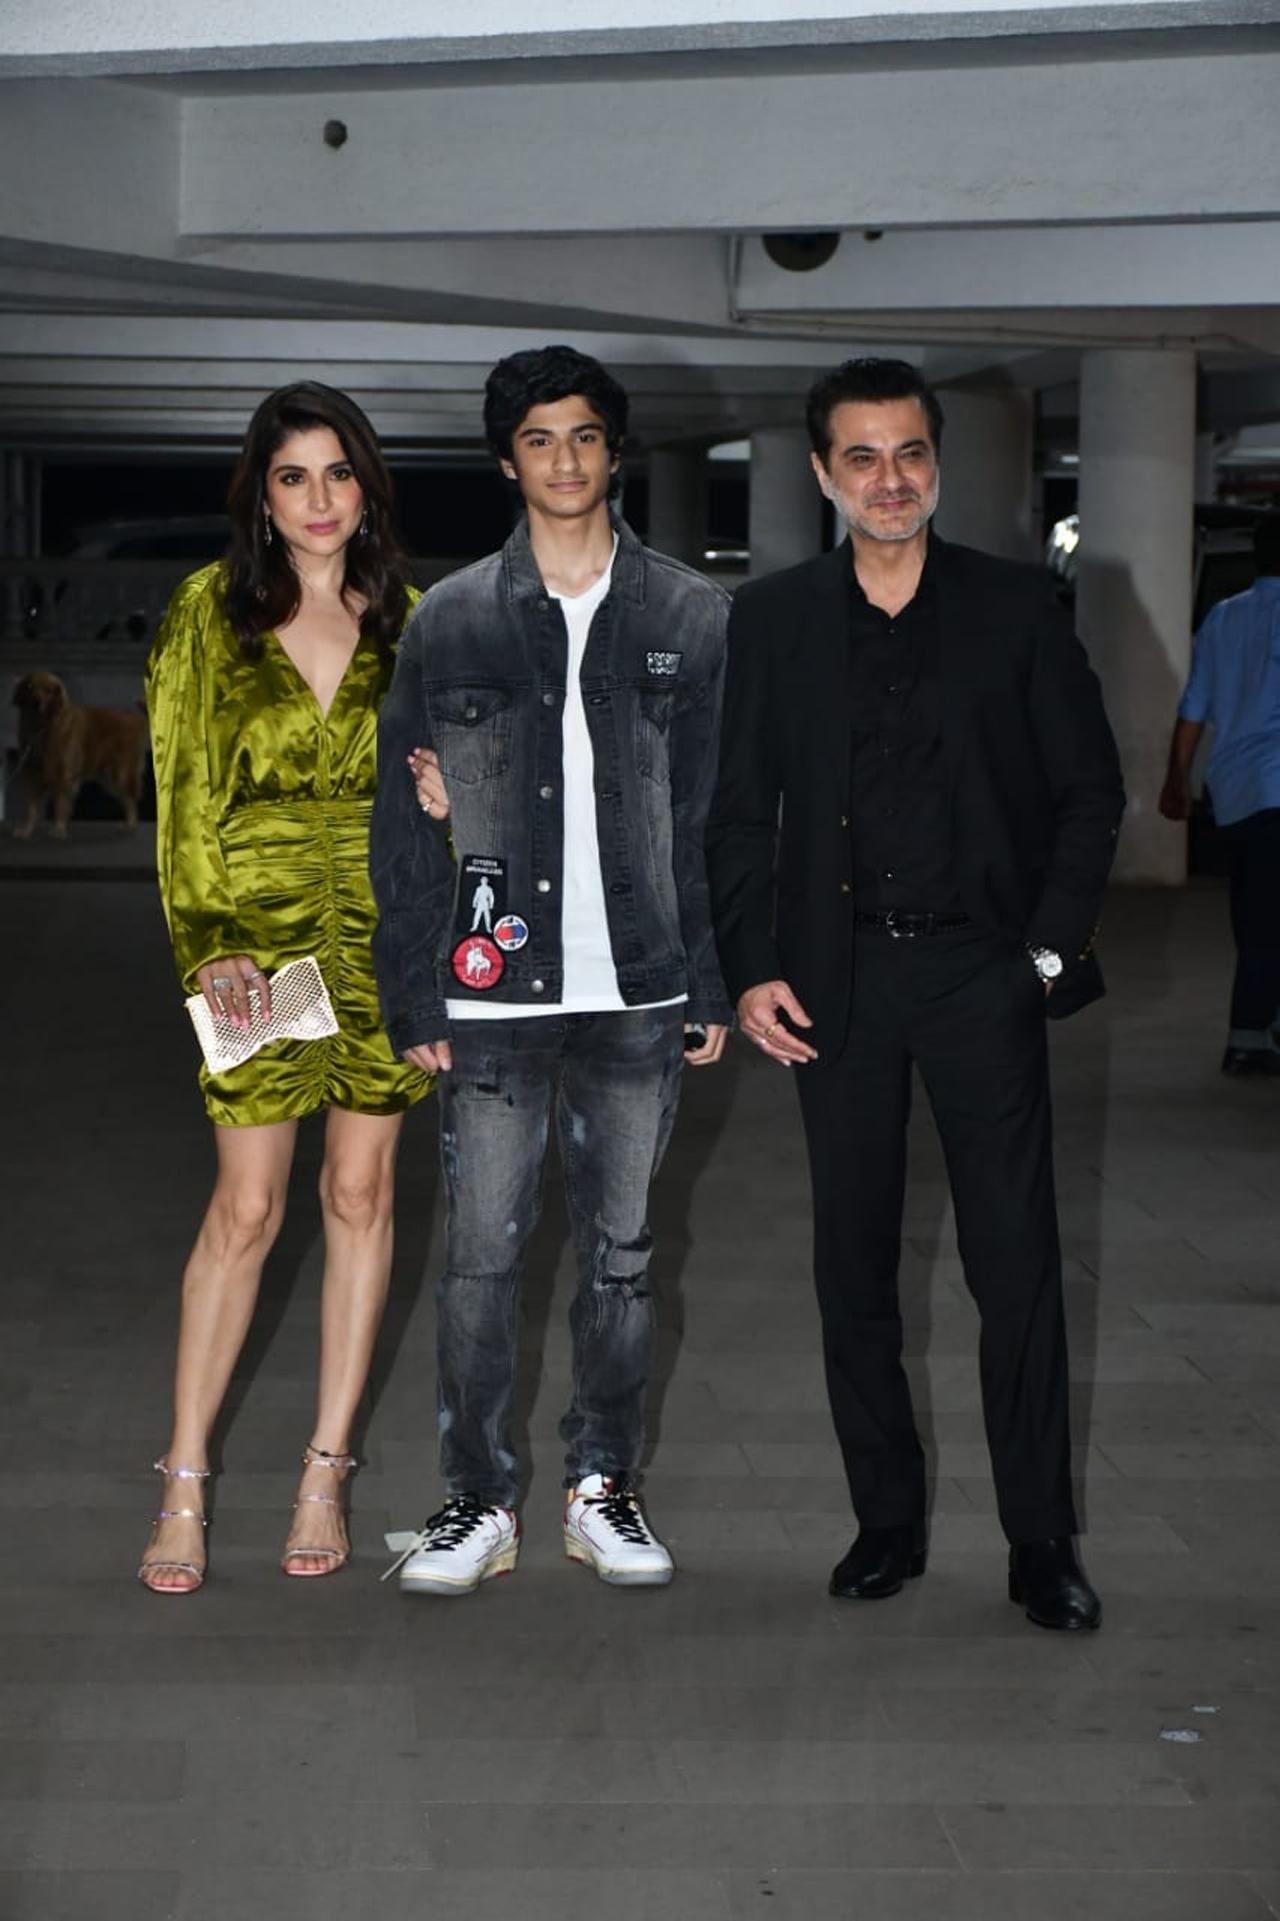 Maheep Kapoor posed with her son Jahaan and husband Sanjay, who will soon be seen opposite Madhuri Dixit-Nene in The Fame Game as they attended the bash together.